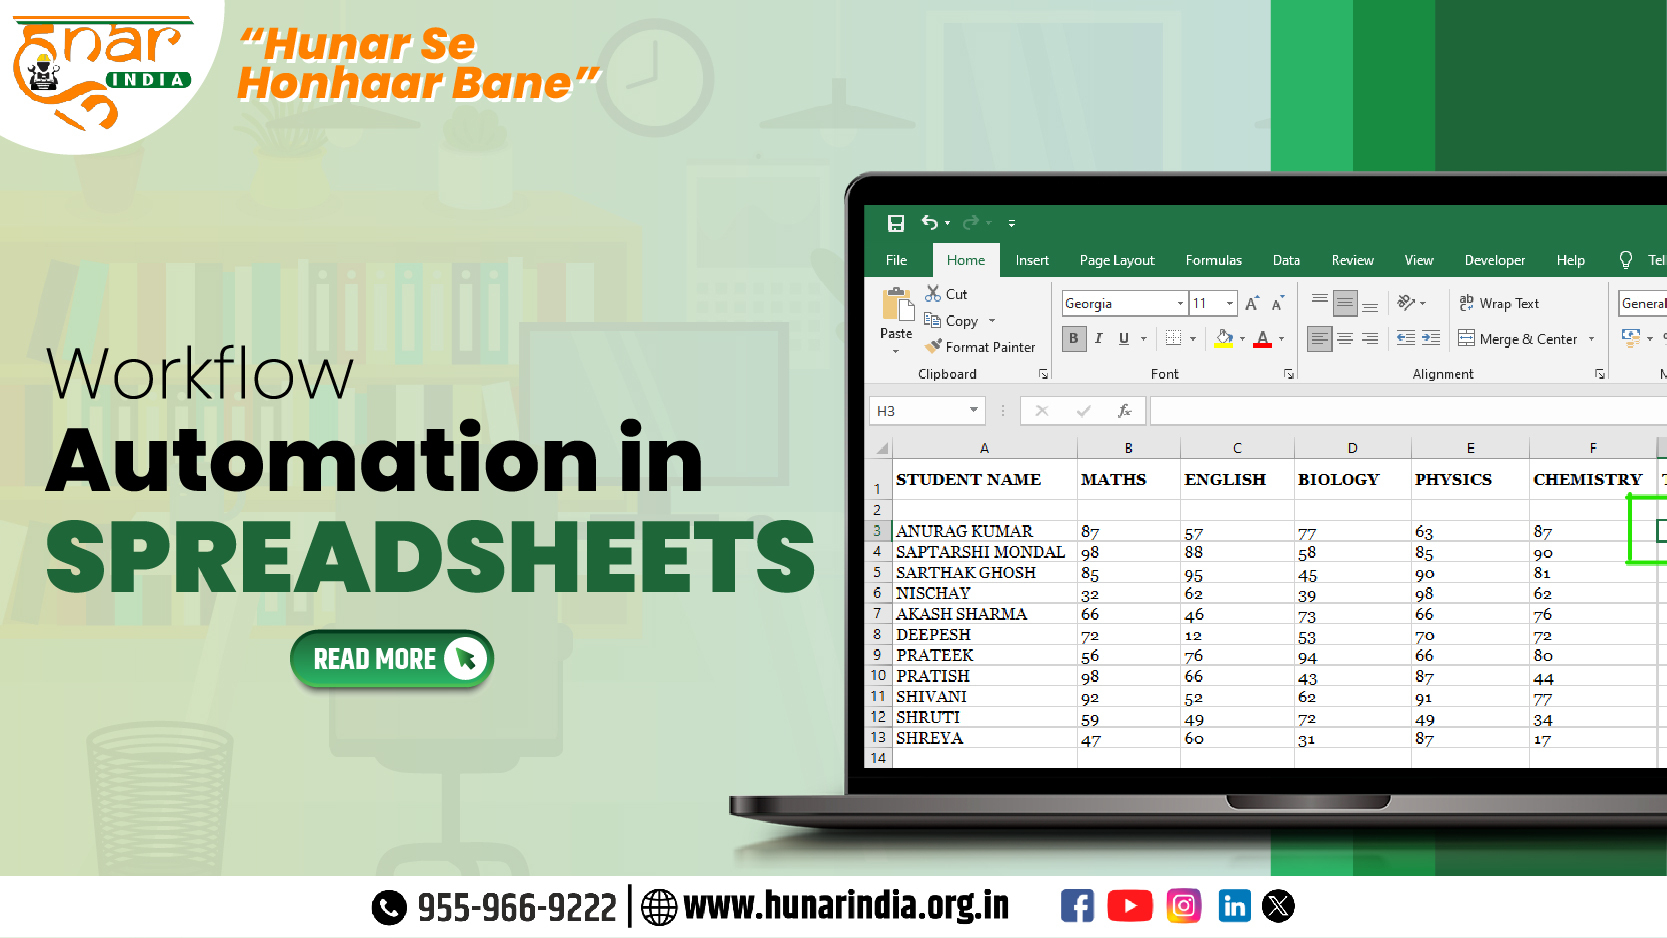 Workflow Automation in Spreadsheets